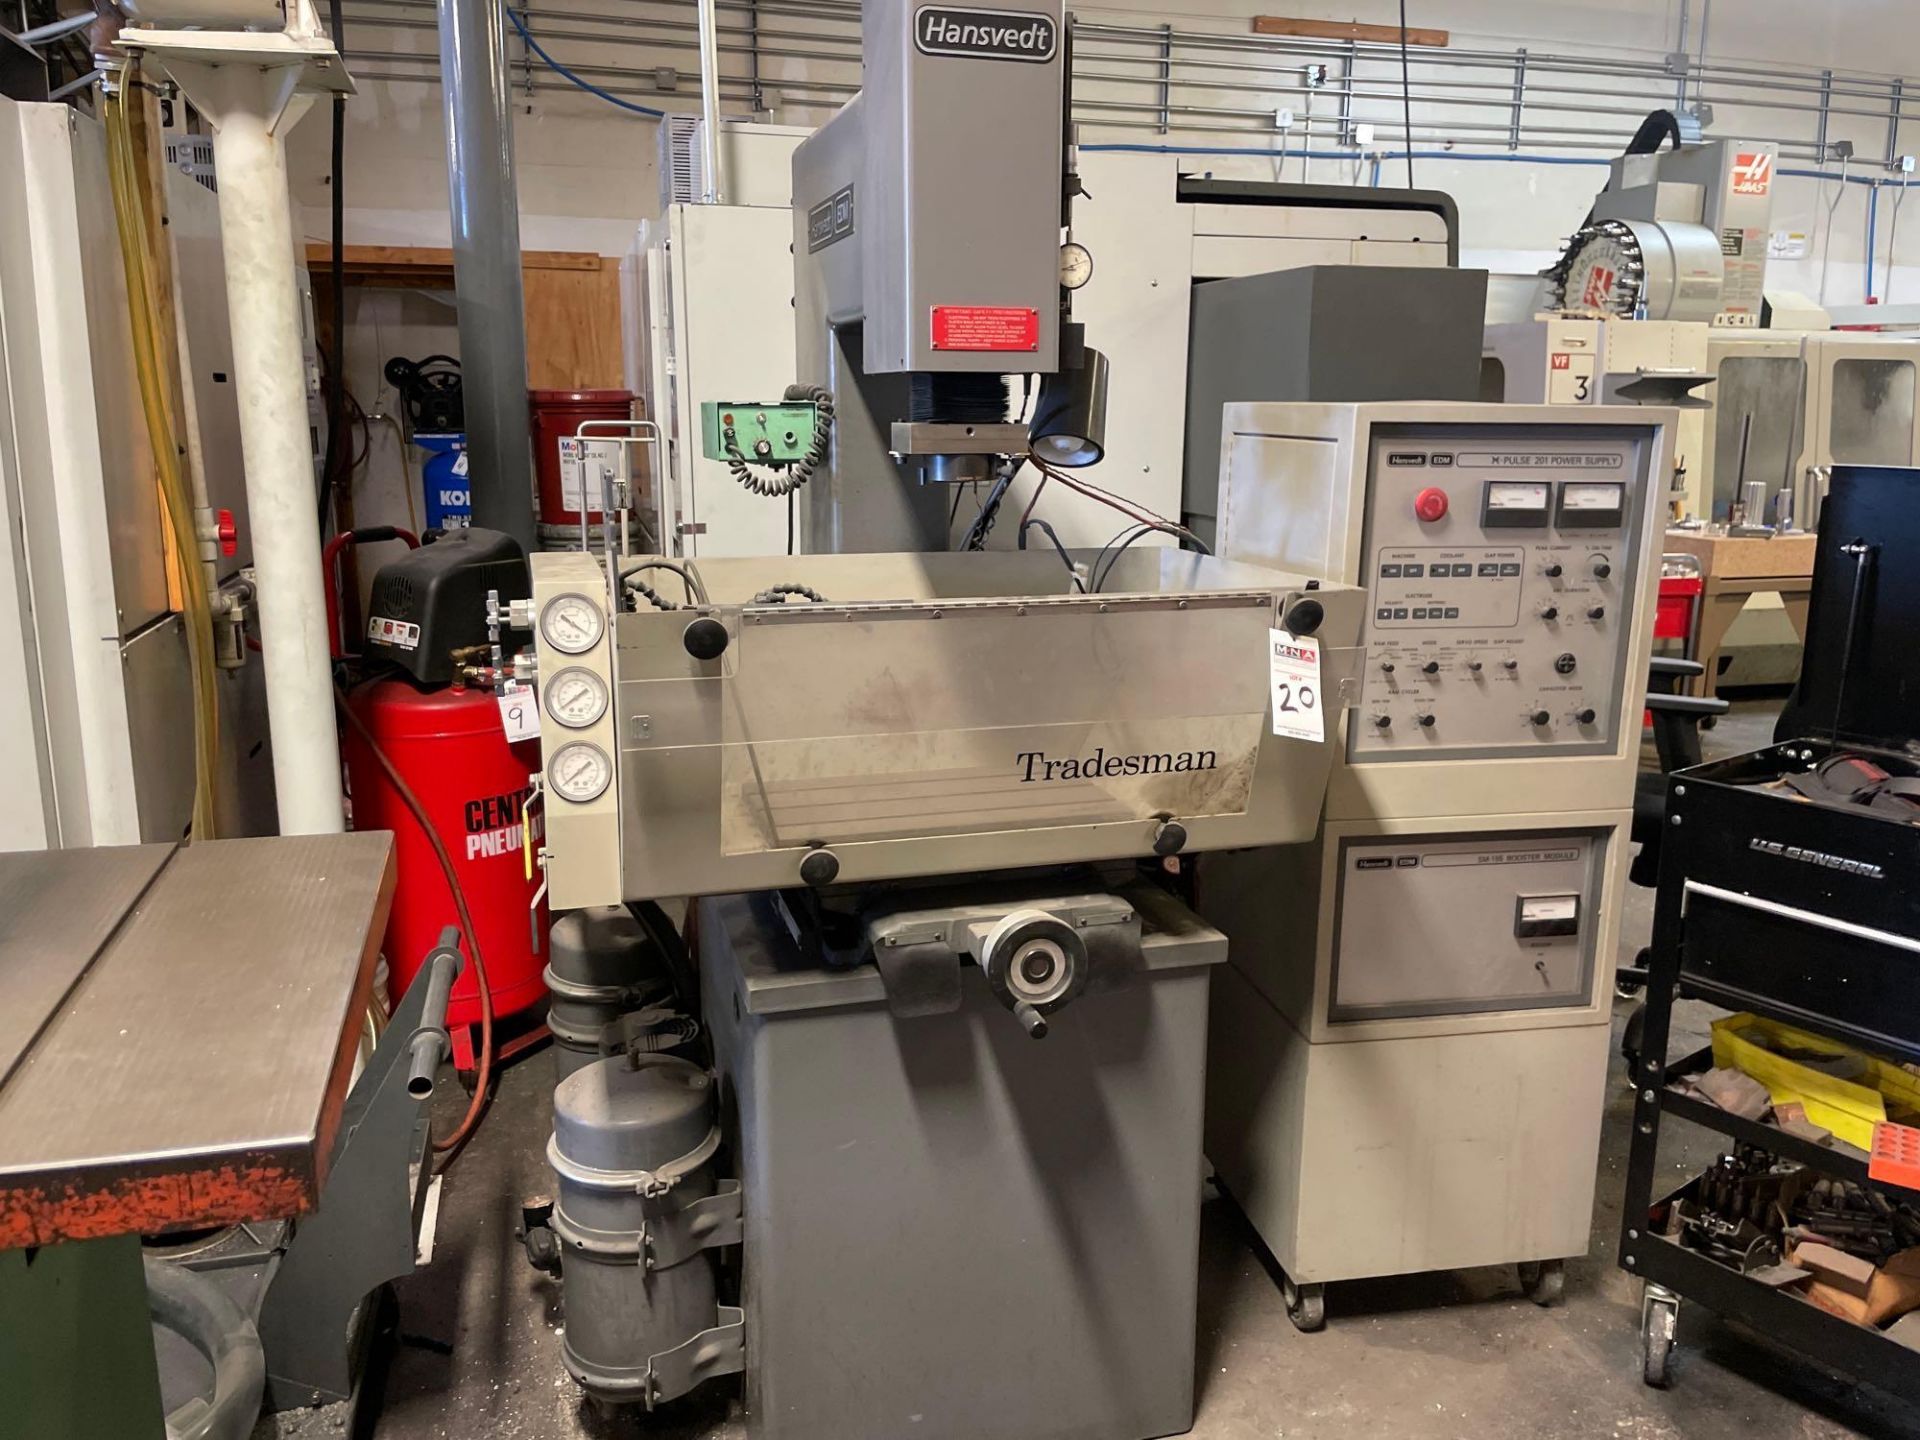 Hansvedt Tradesman SM-155 Sinker EDM, C axis, DRO with EDM Roto Bore Cutting Head and Extra Parts - Image 3 of 16